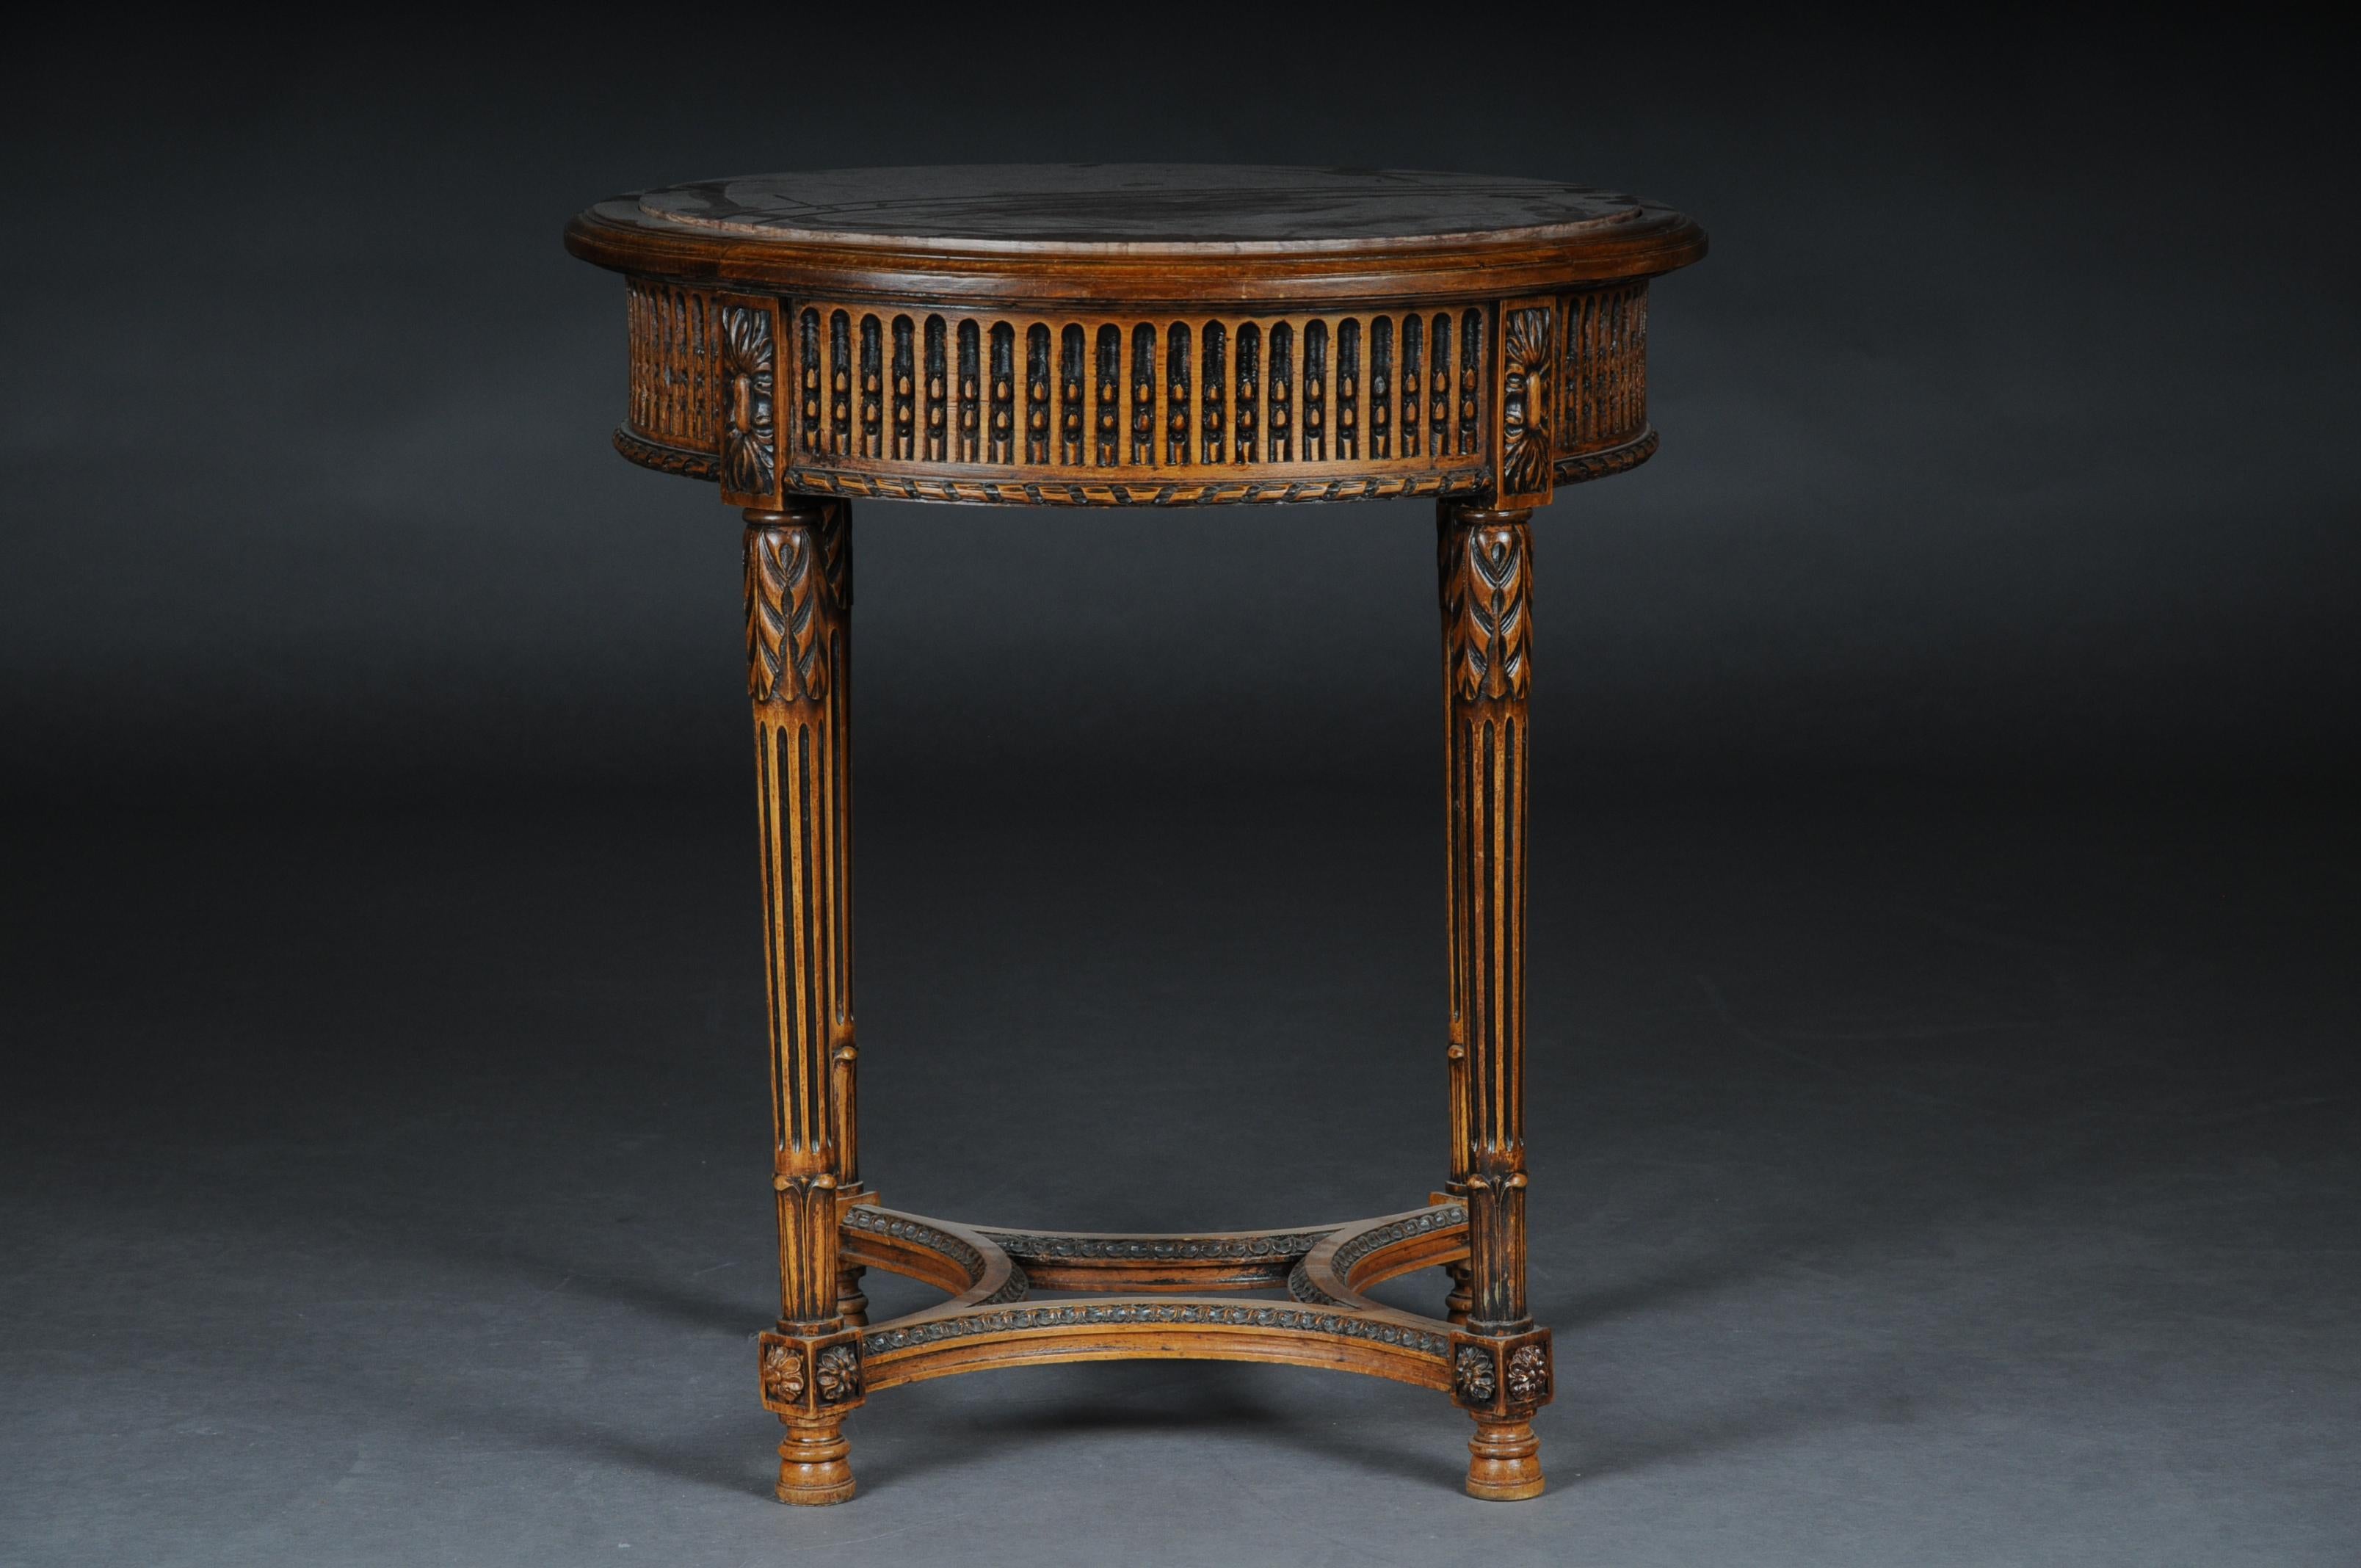 Classic French side table in Louis XVI, beechwood

Hand carved solid beechwood. Round relieved frame base on fluted legs. Below connected center bar. Round, low-profile, framed tabletop with marble slab embedded in it.
(G - 78).